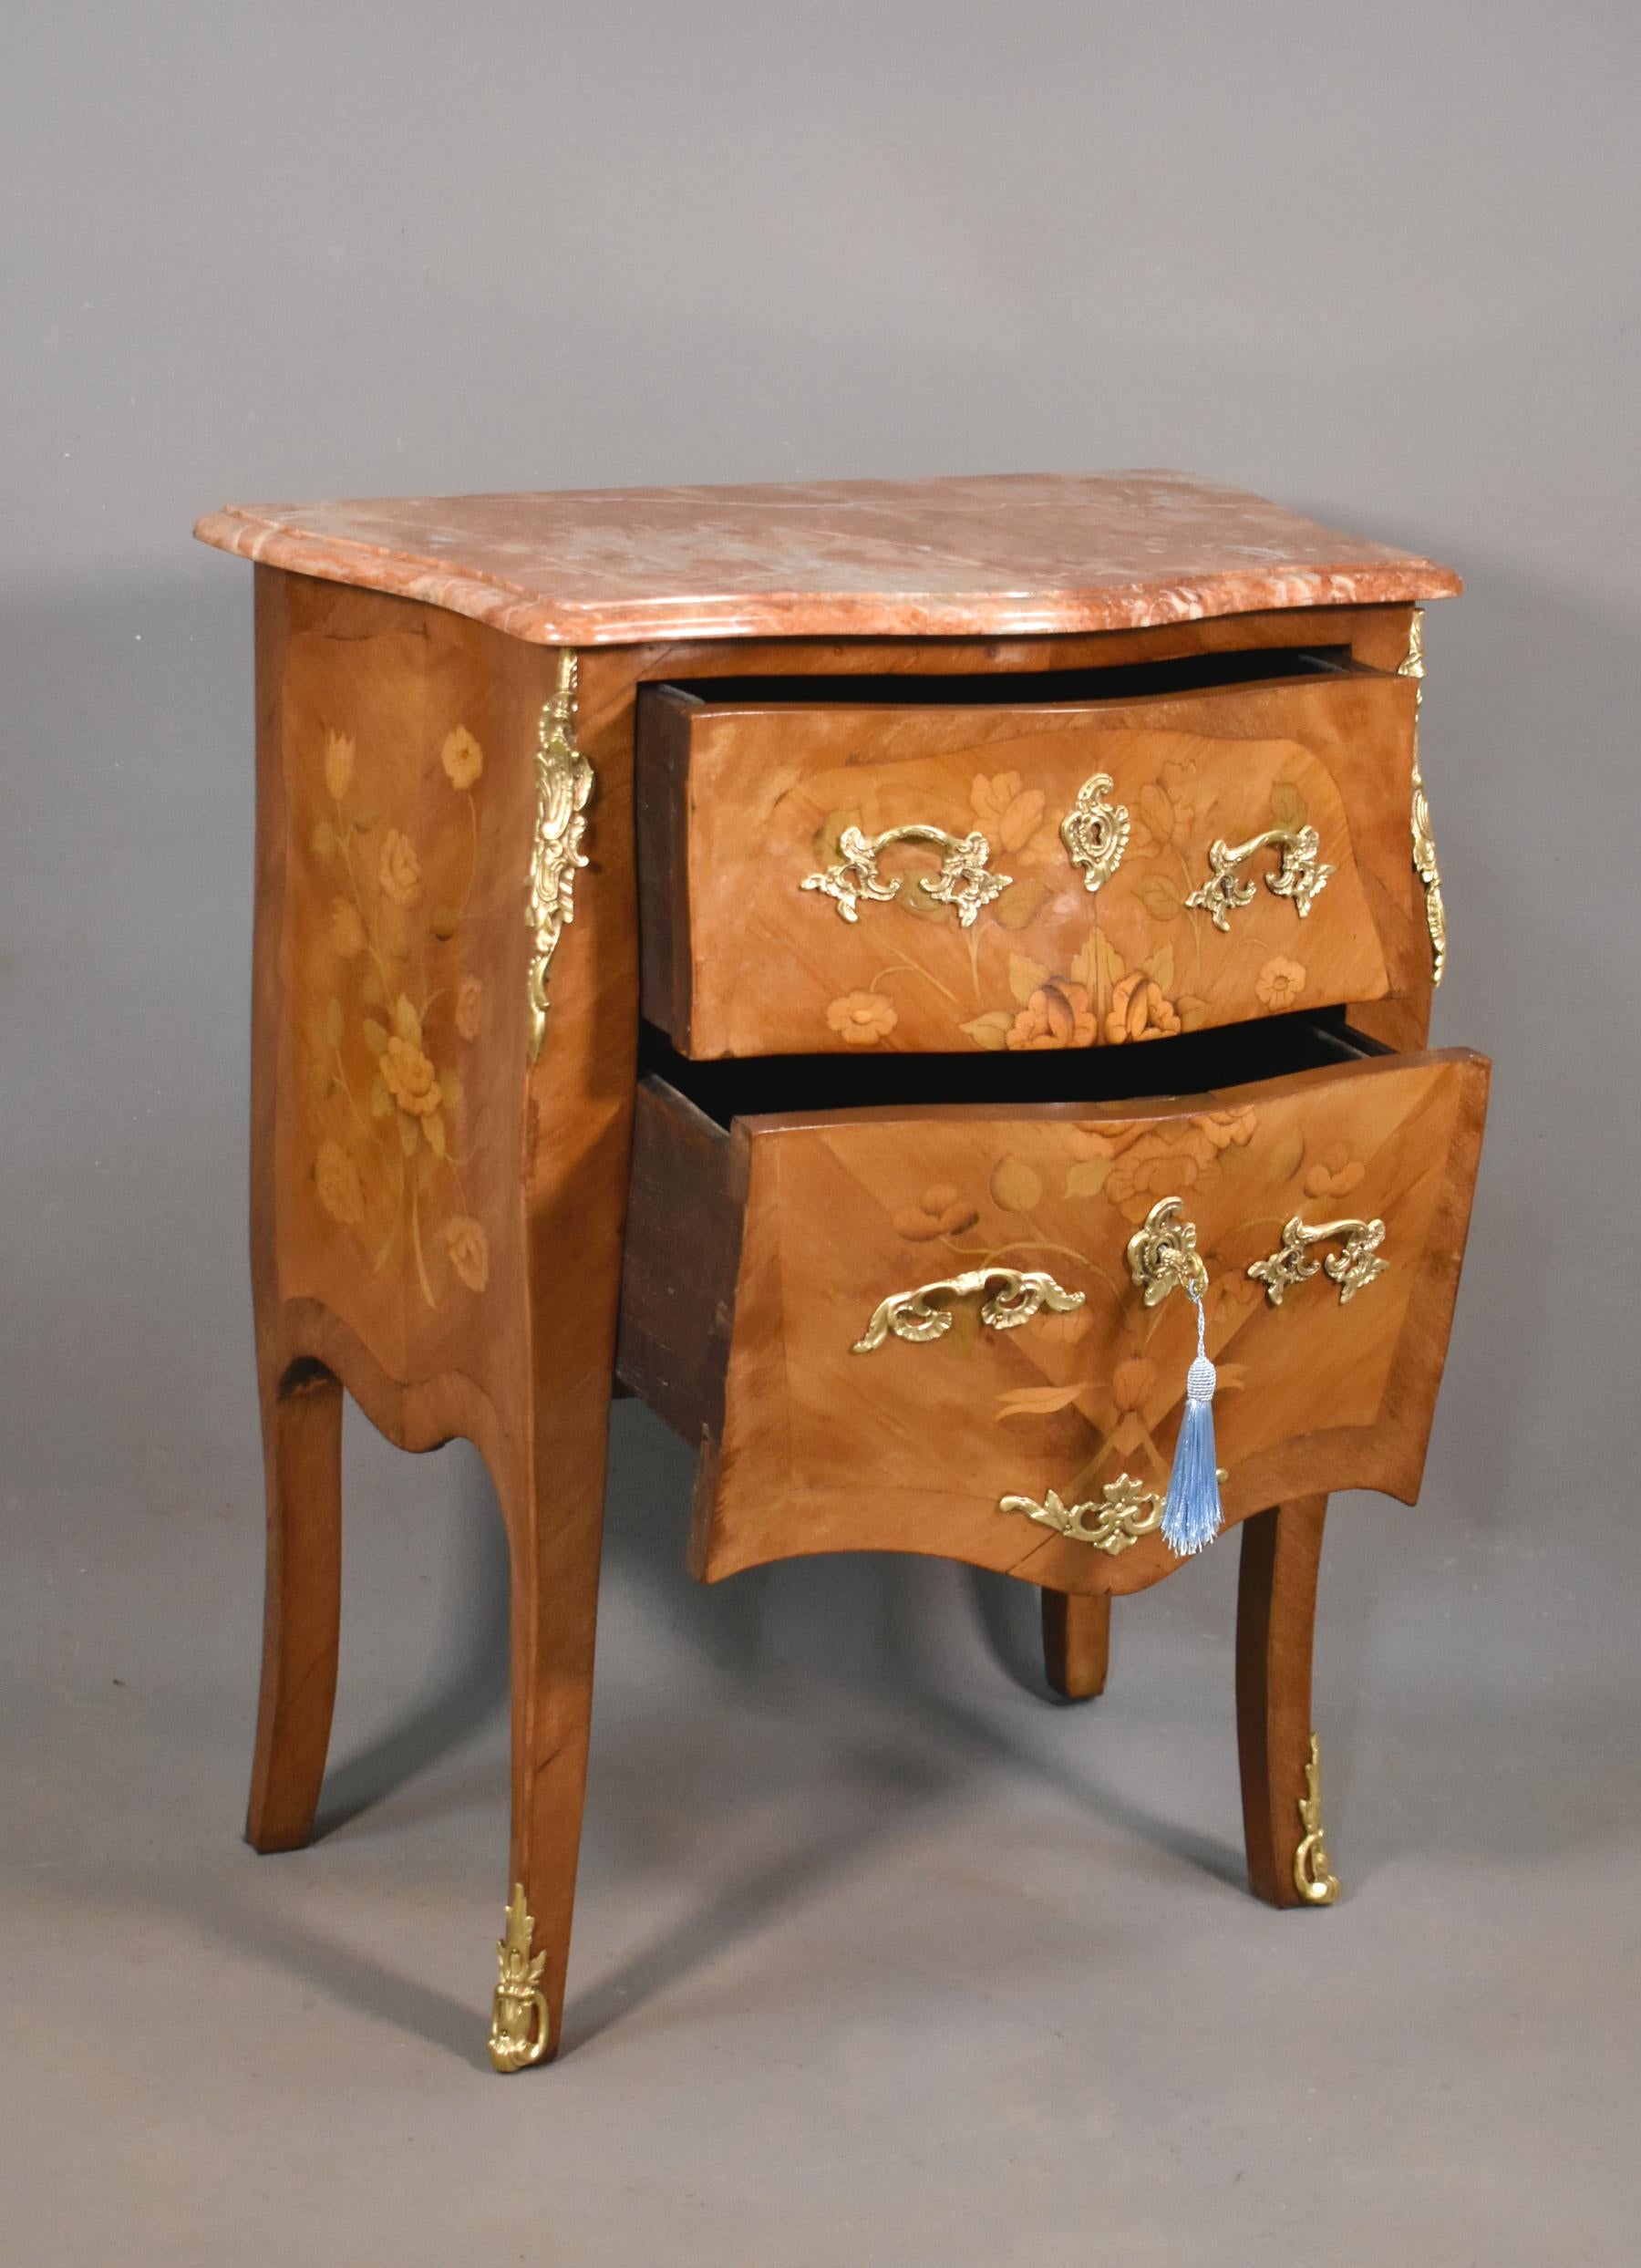 Antique French Louis XV Revival Marquetry Bombe Commode 19C For Sale 5